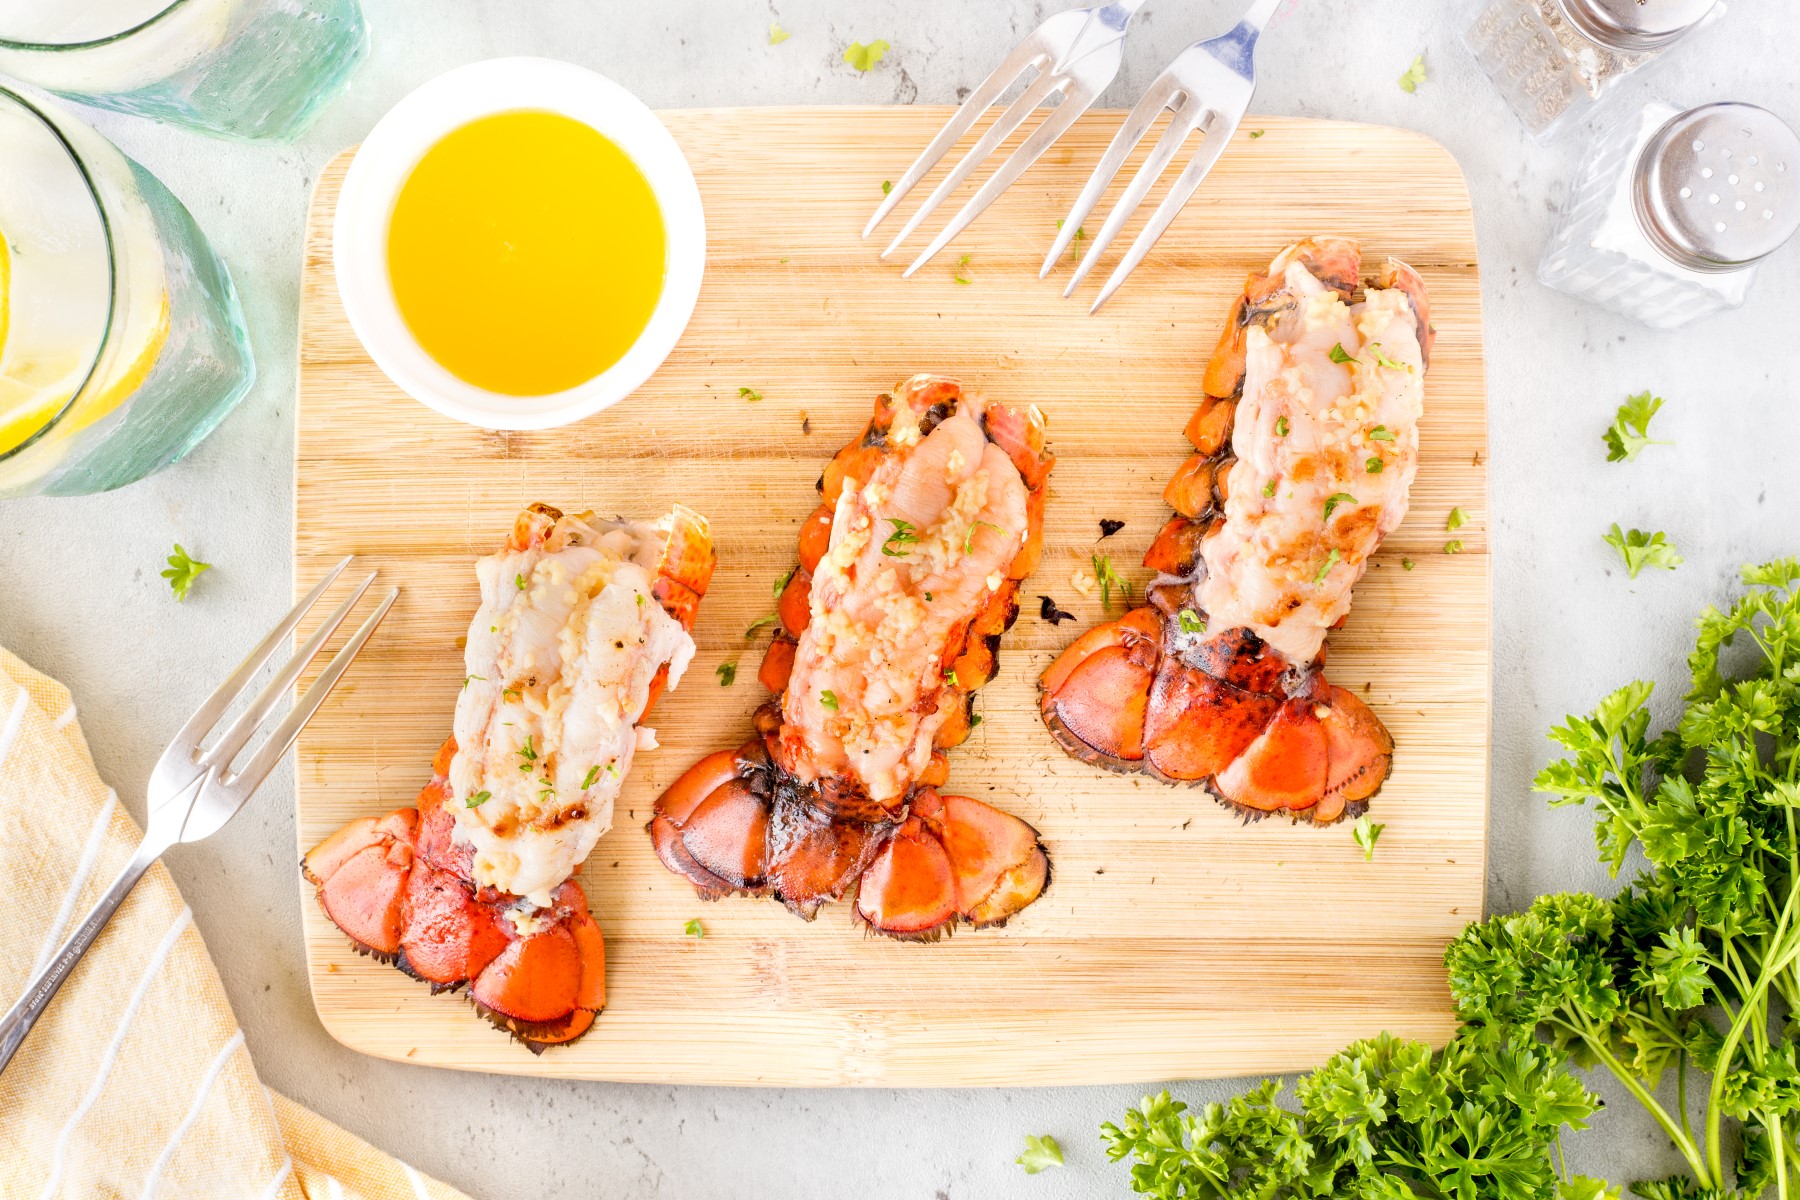 Grilled lobster tails on a wooden cutting board with a small bowl of melted butter and 3 forks, a bunch of parsley beside the board.